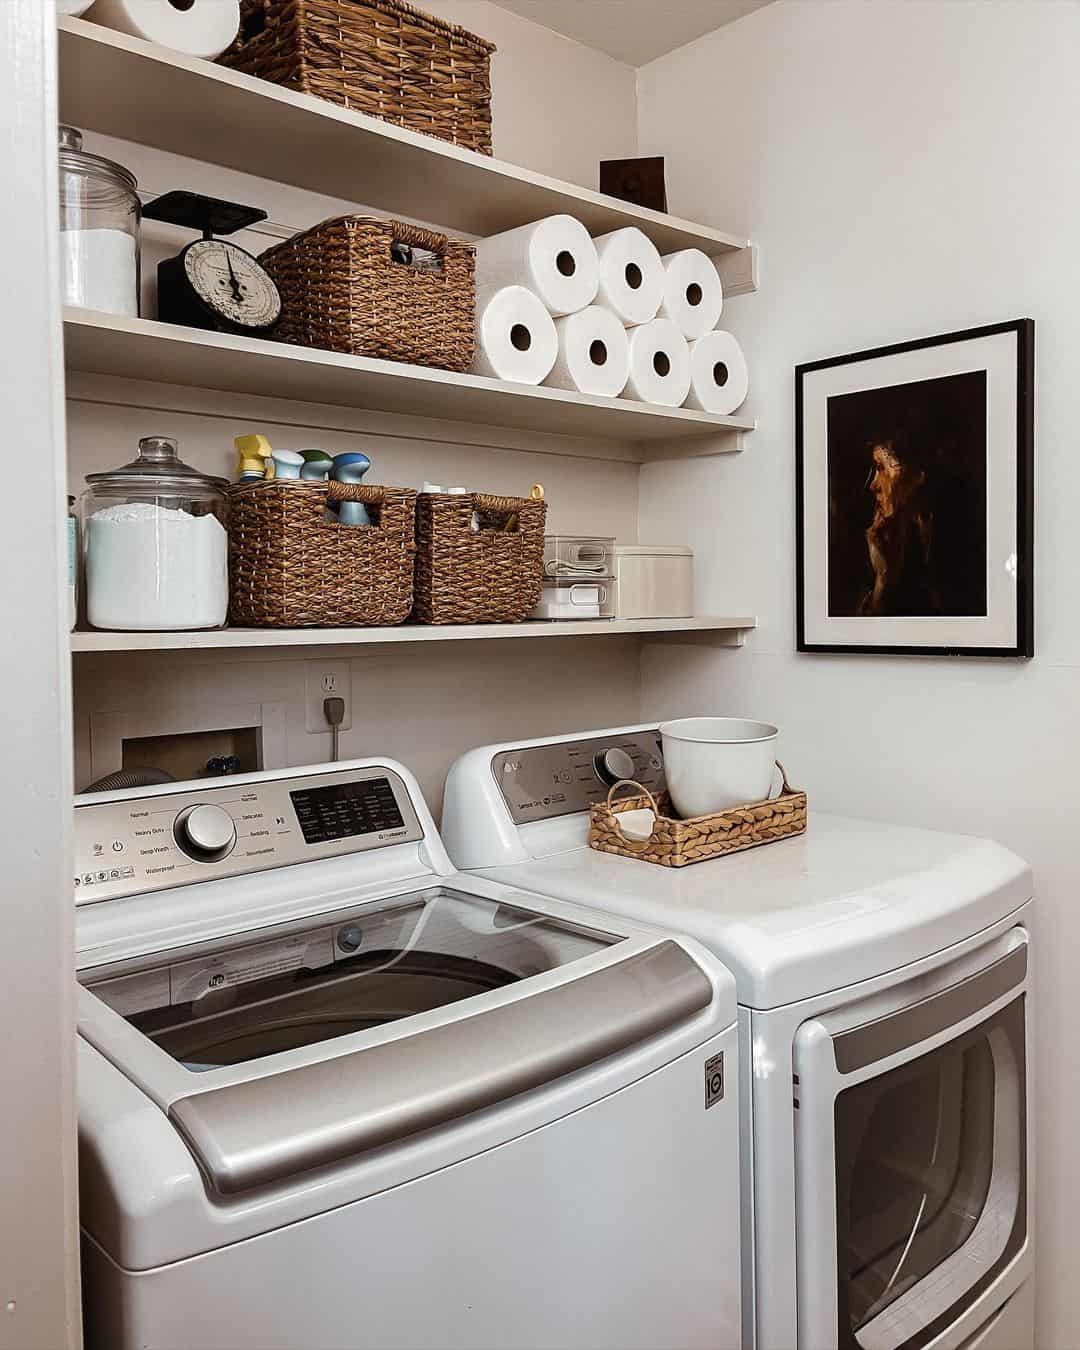 https://www.soulandlane.com/wp-content/uploads/2023/03/Small-Laundry-Room-Ideas-With-Top-Loading-Washer.jpg